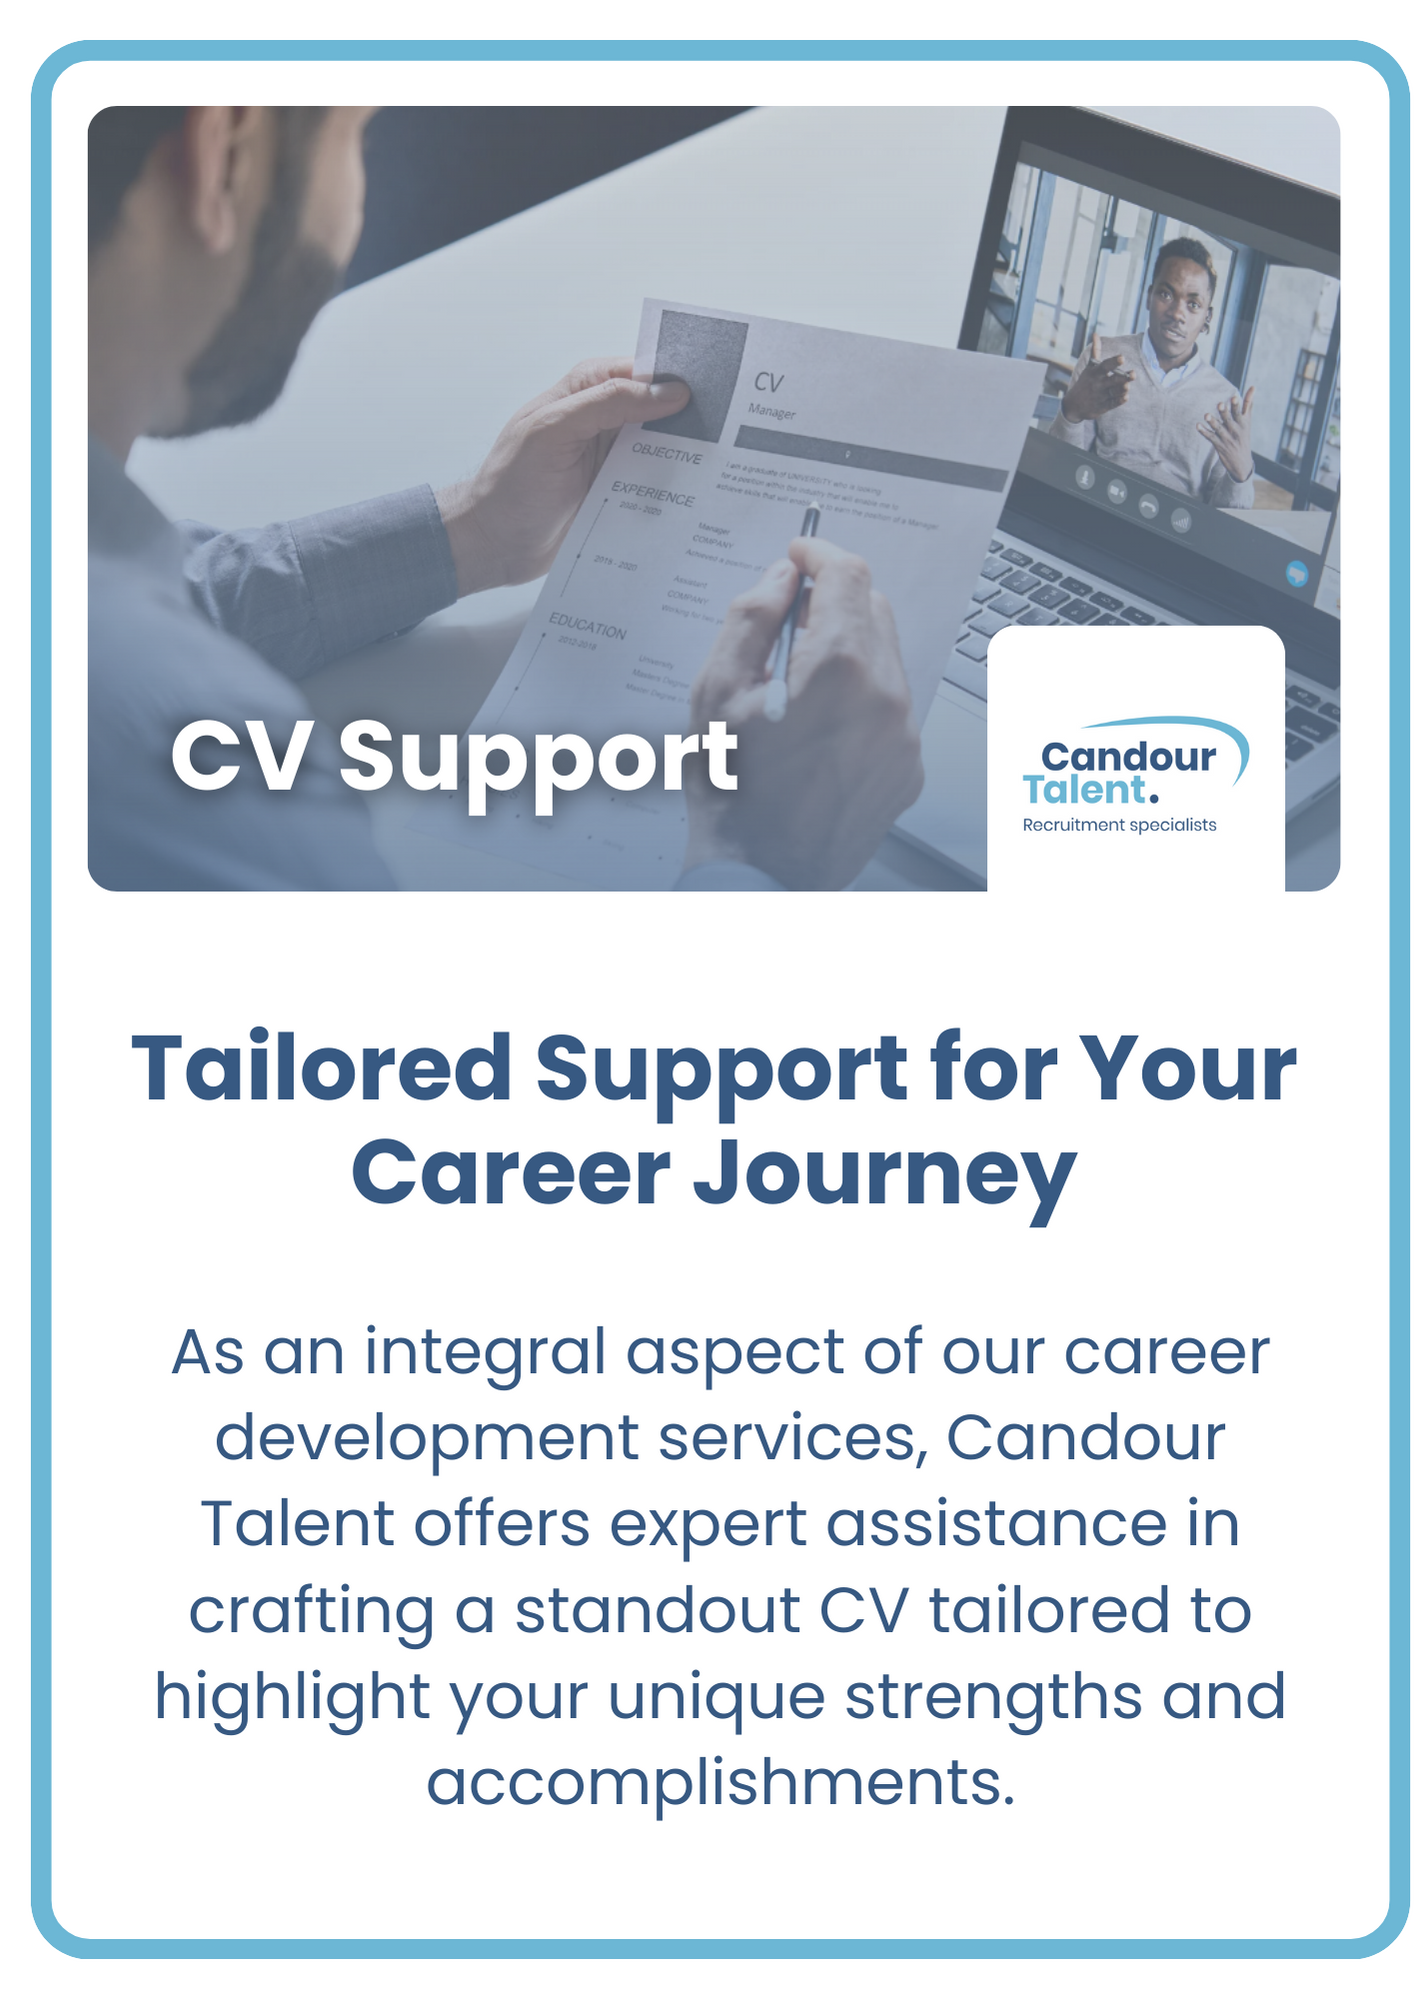 Candour Talent Recruitment Agency - candidate page. image of 'CV support'  Tailored Support for Your Career Journey As an integral aspect of our career development services, Candour Talent offers expert assistance in crafting a standout CV tailored to highlight your unique strengths and accomplishments.